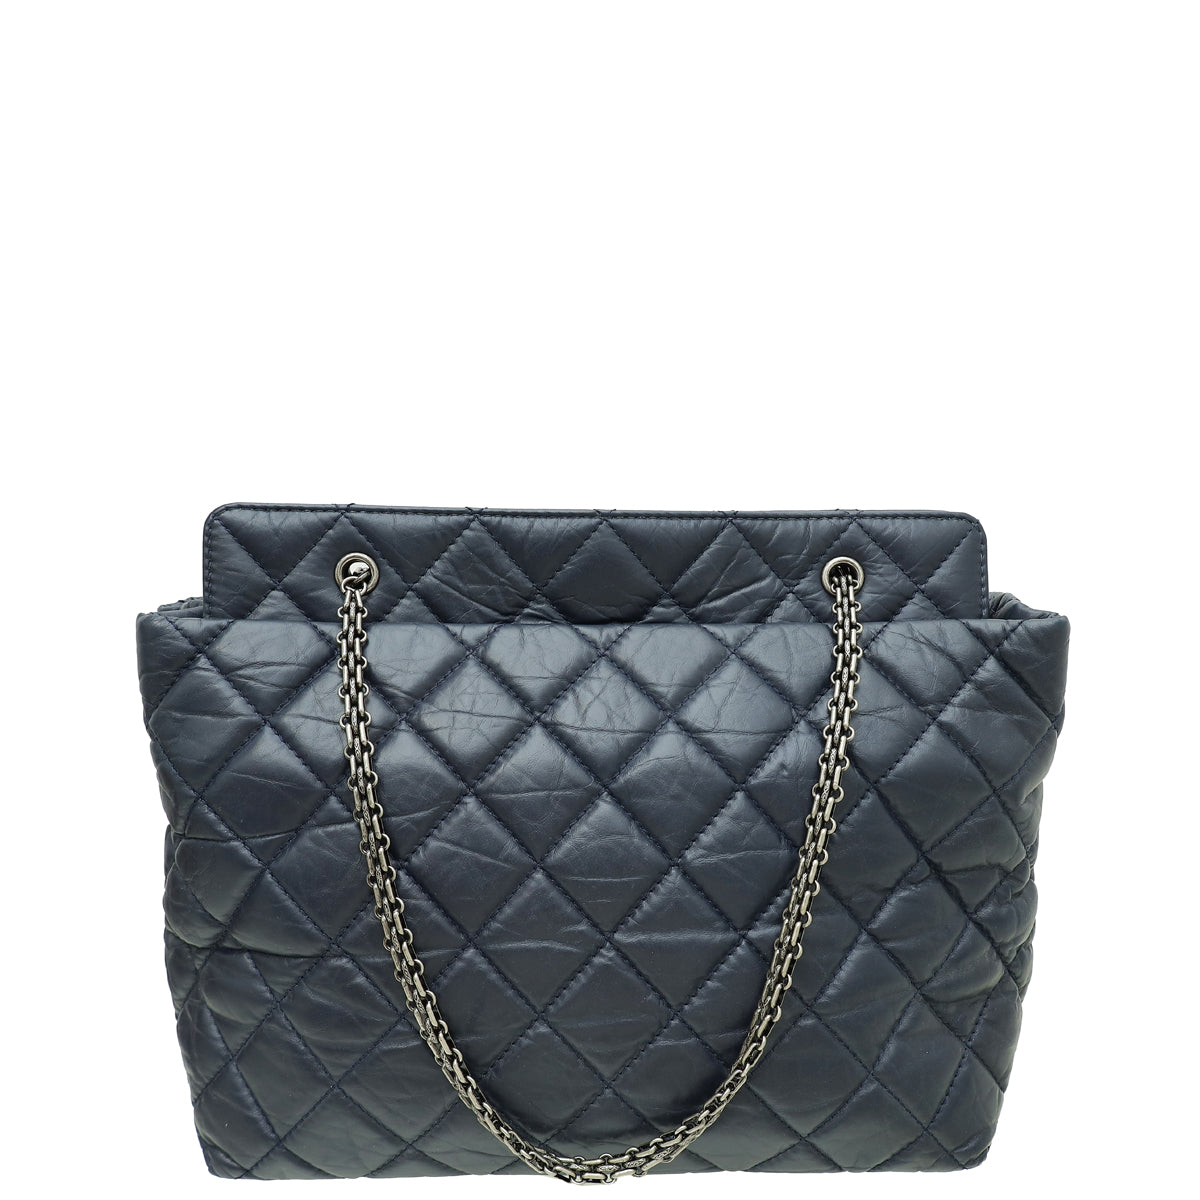 Chanel Navy Reissue Shopping Tote Bag